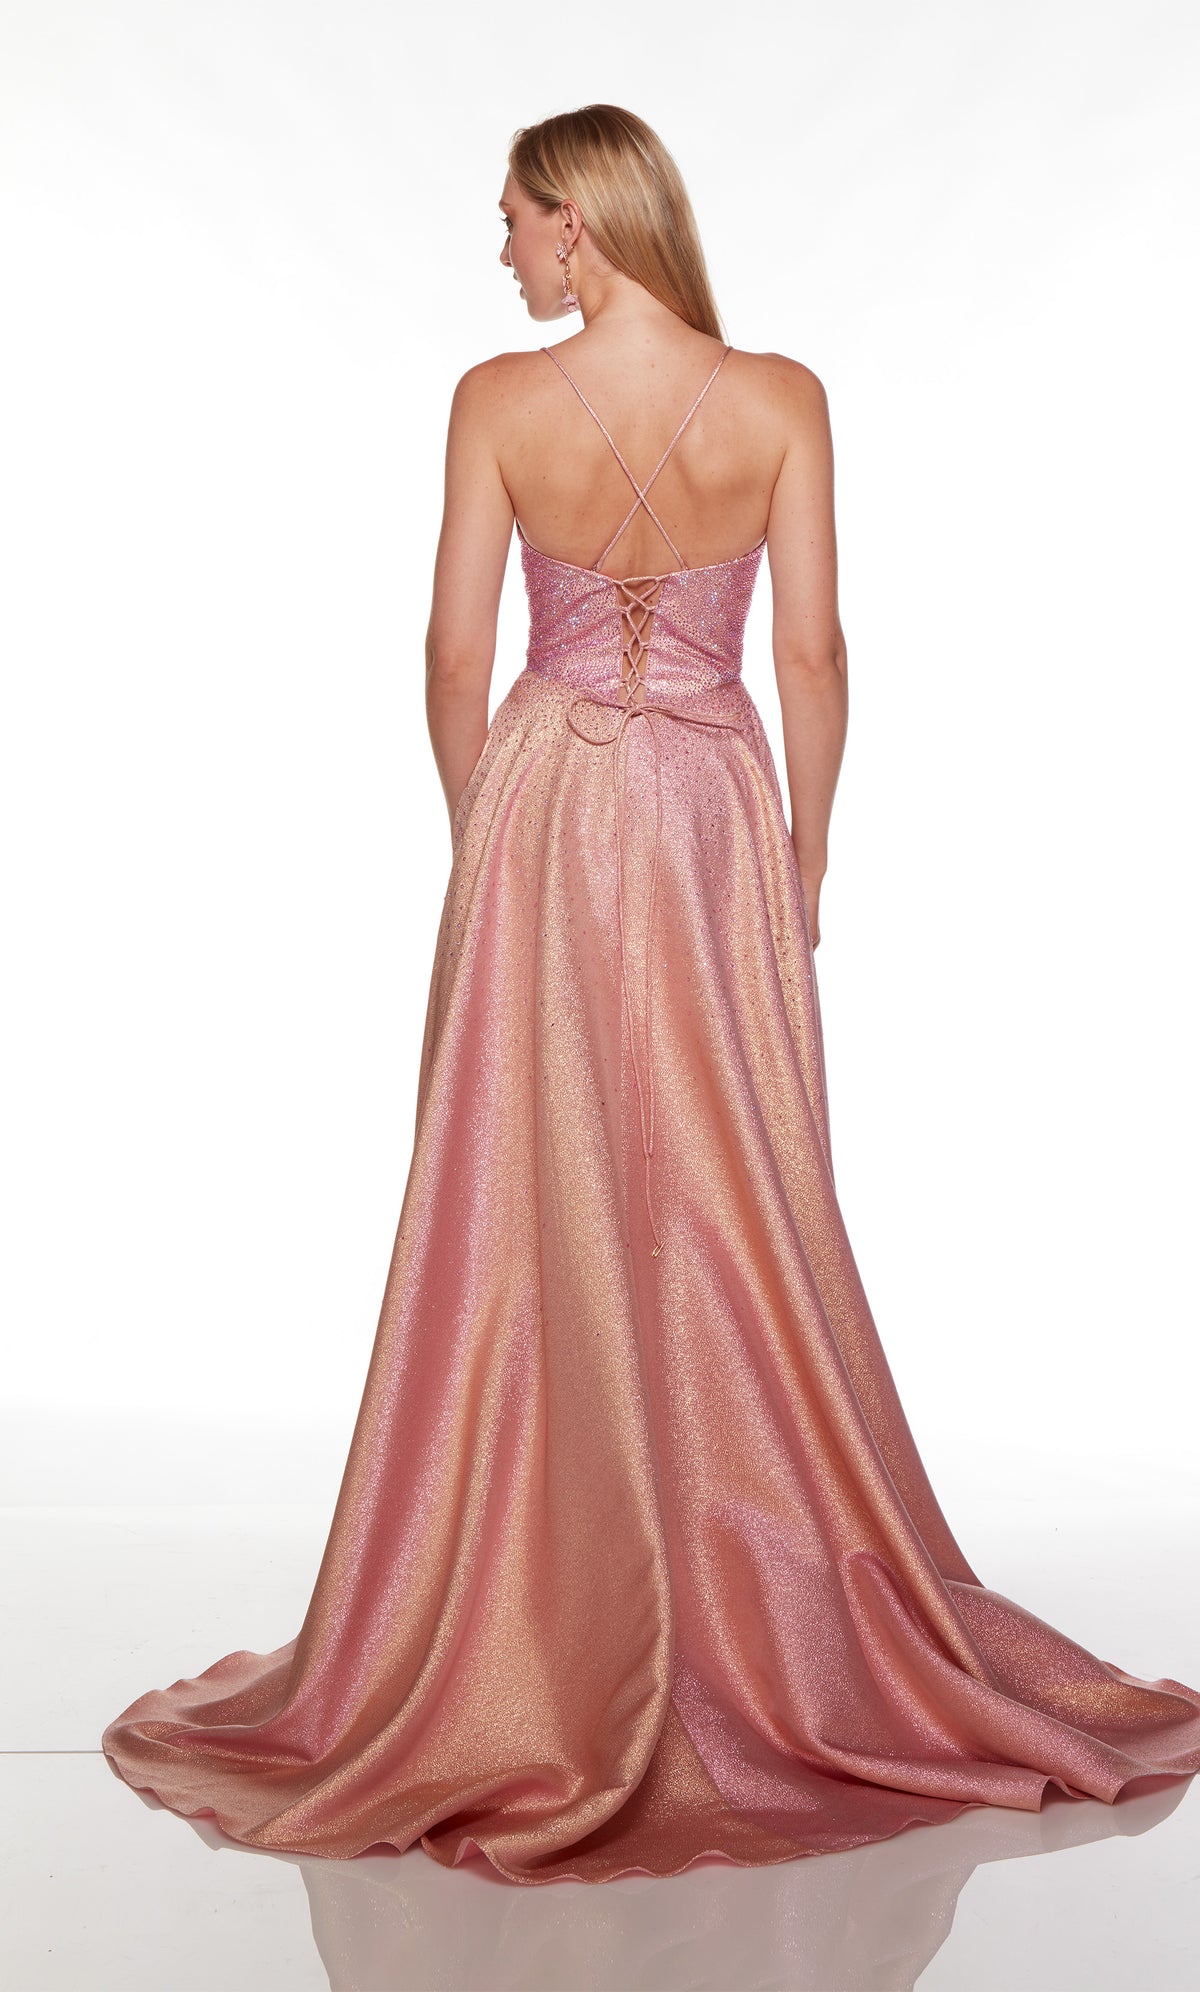 Criss-cross back gown with train in iridescent pink-gold.